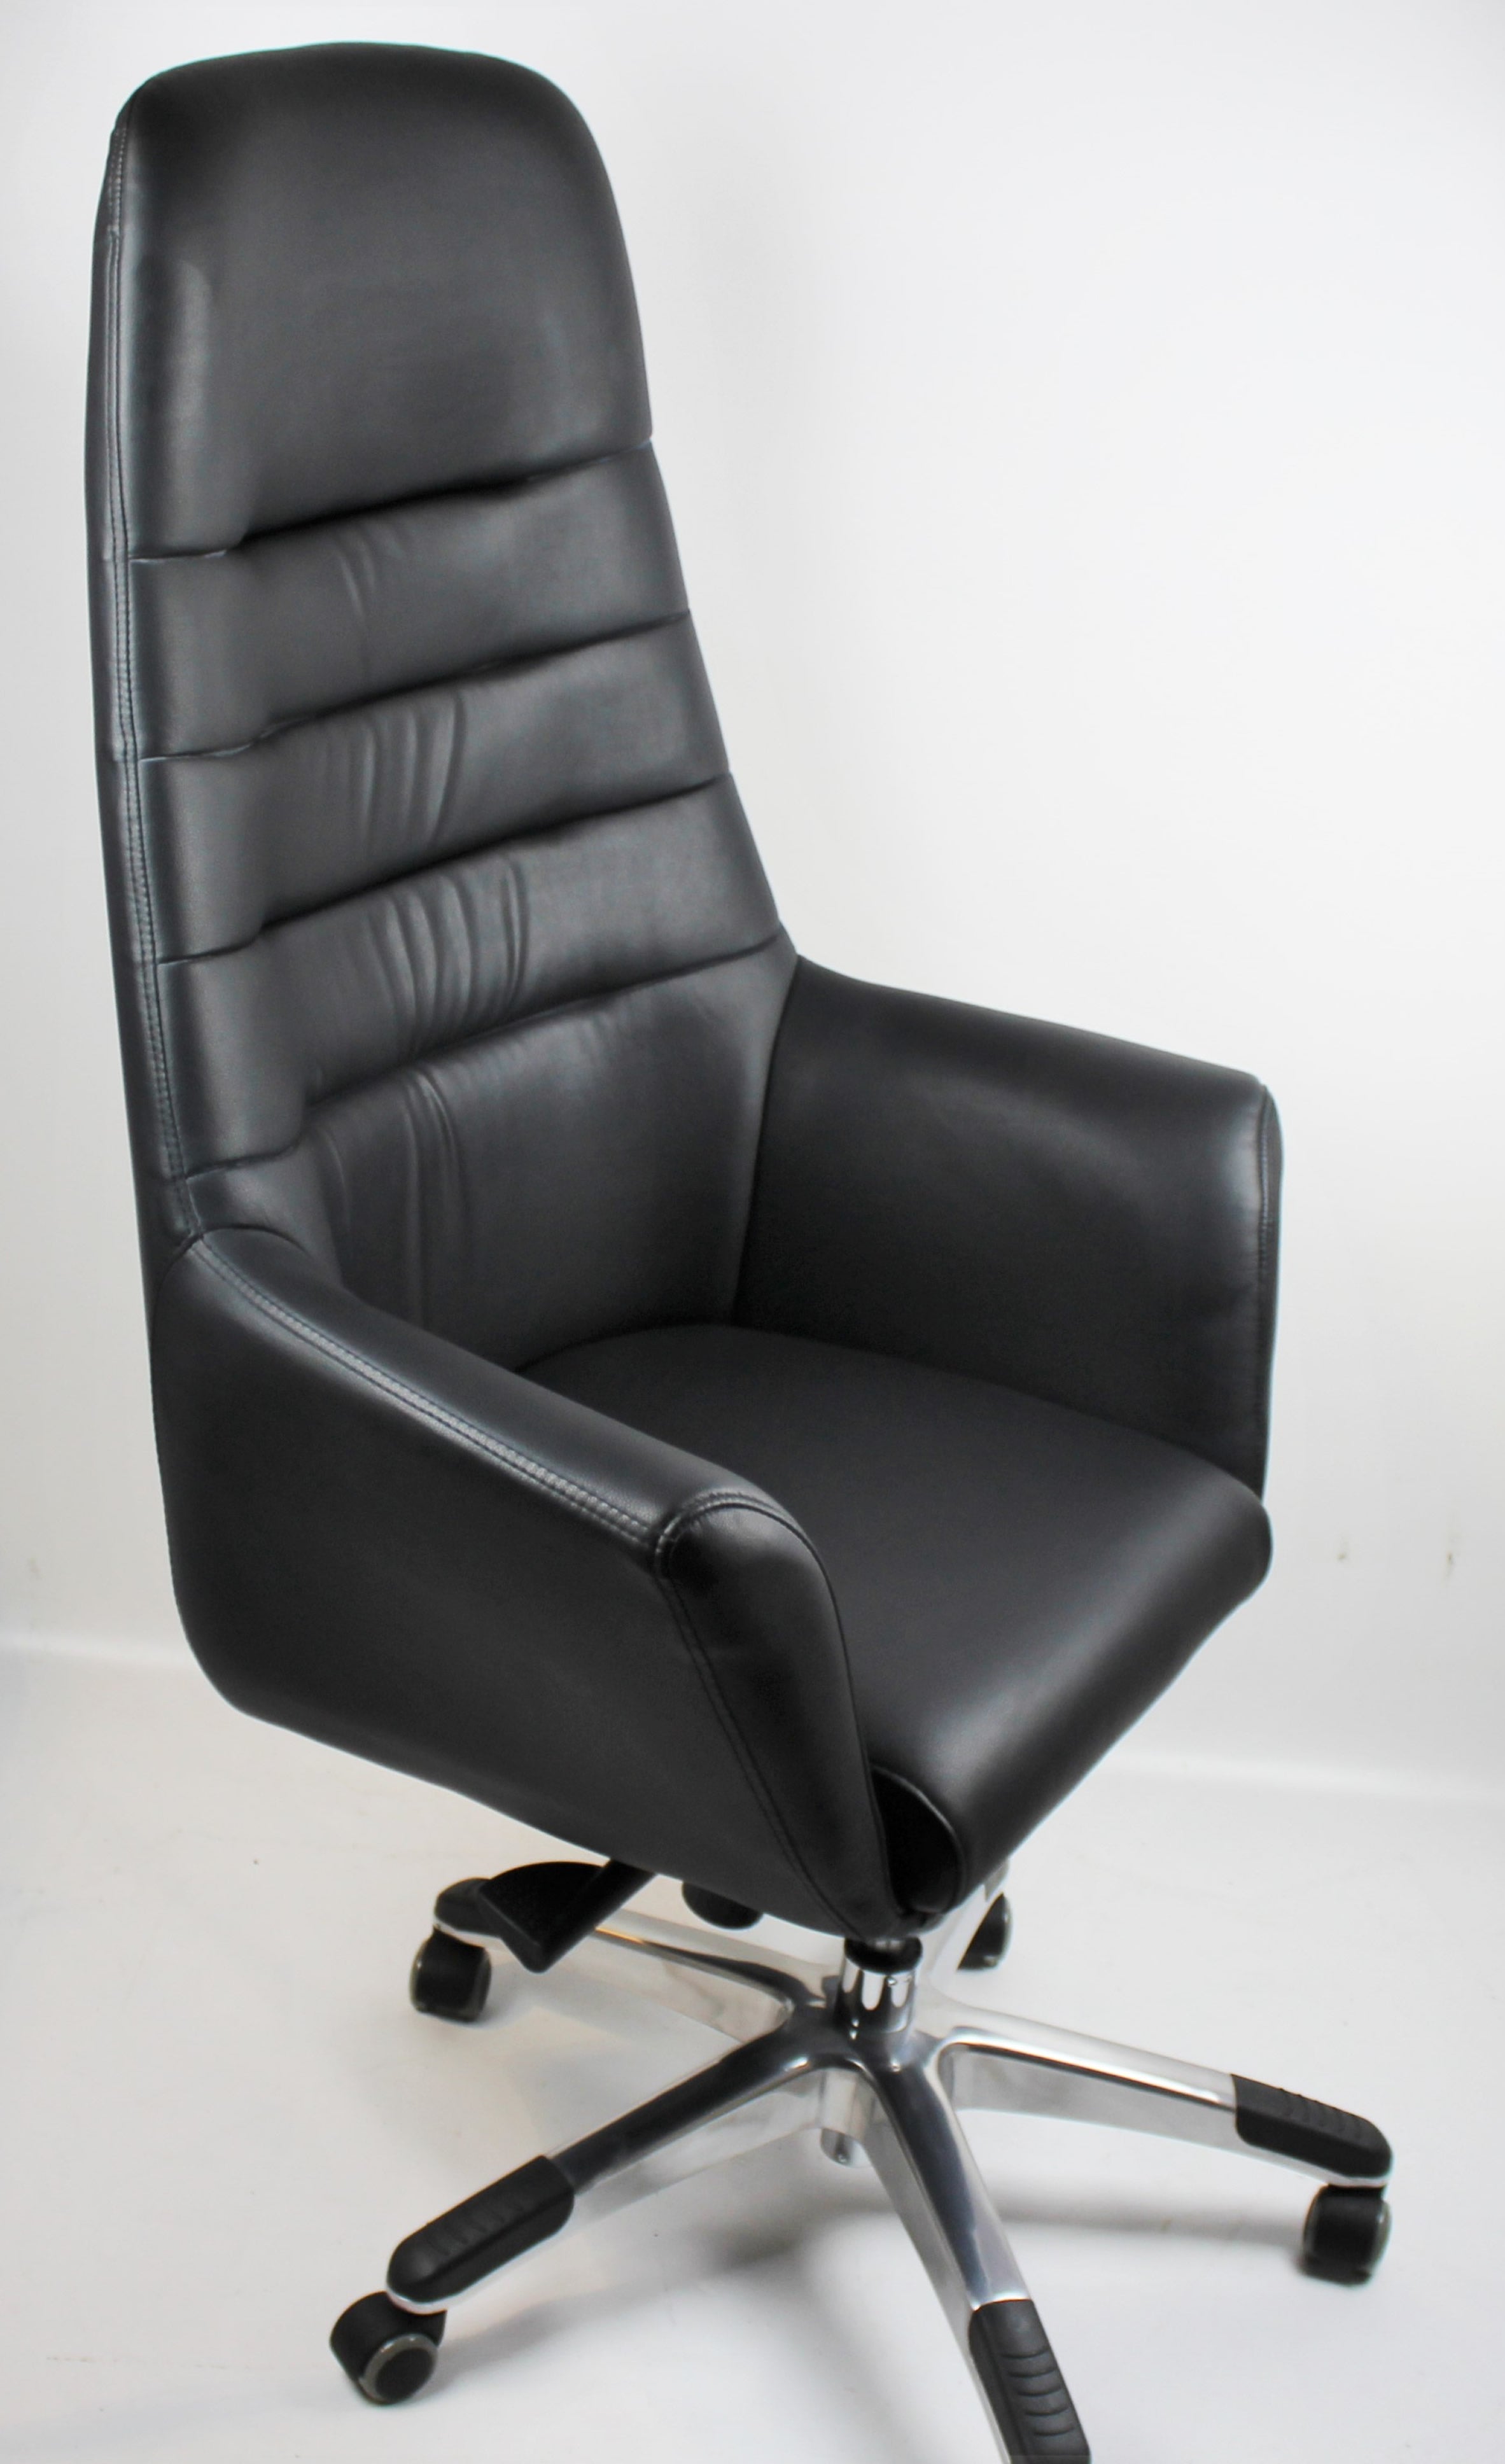 Office Chair In Black With Swivel GRA-CHA-506A-BLK